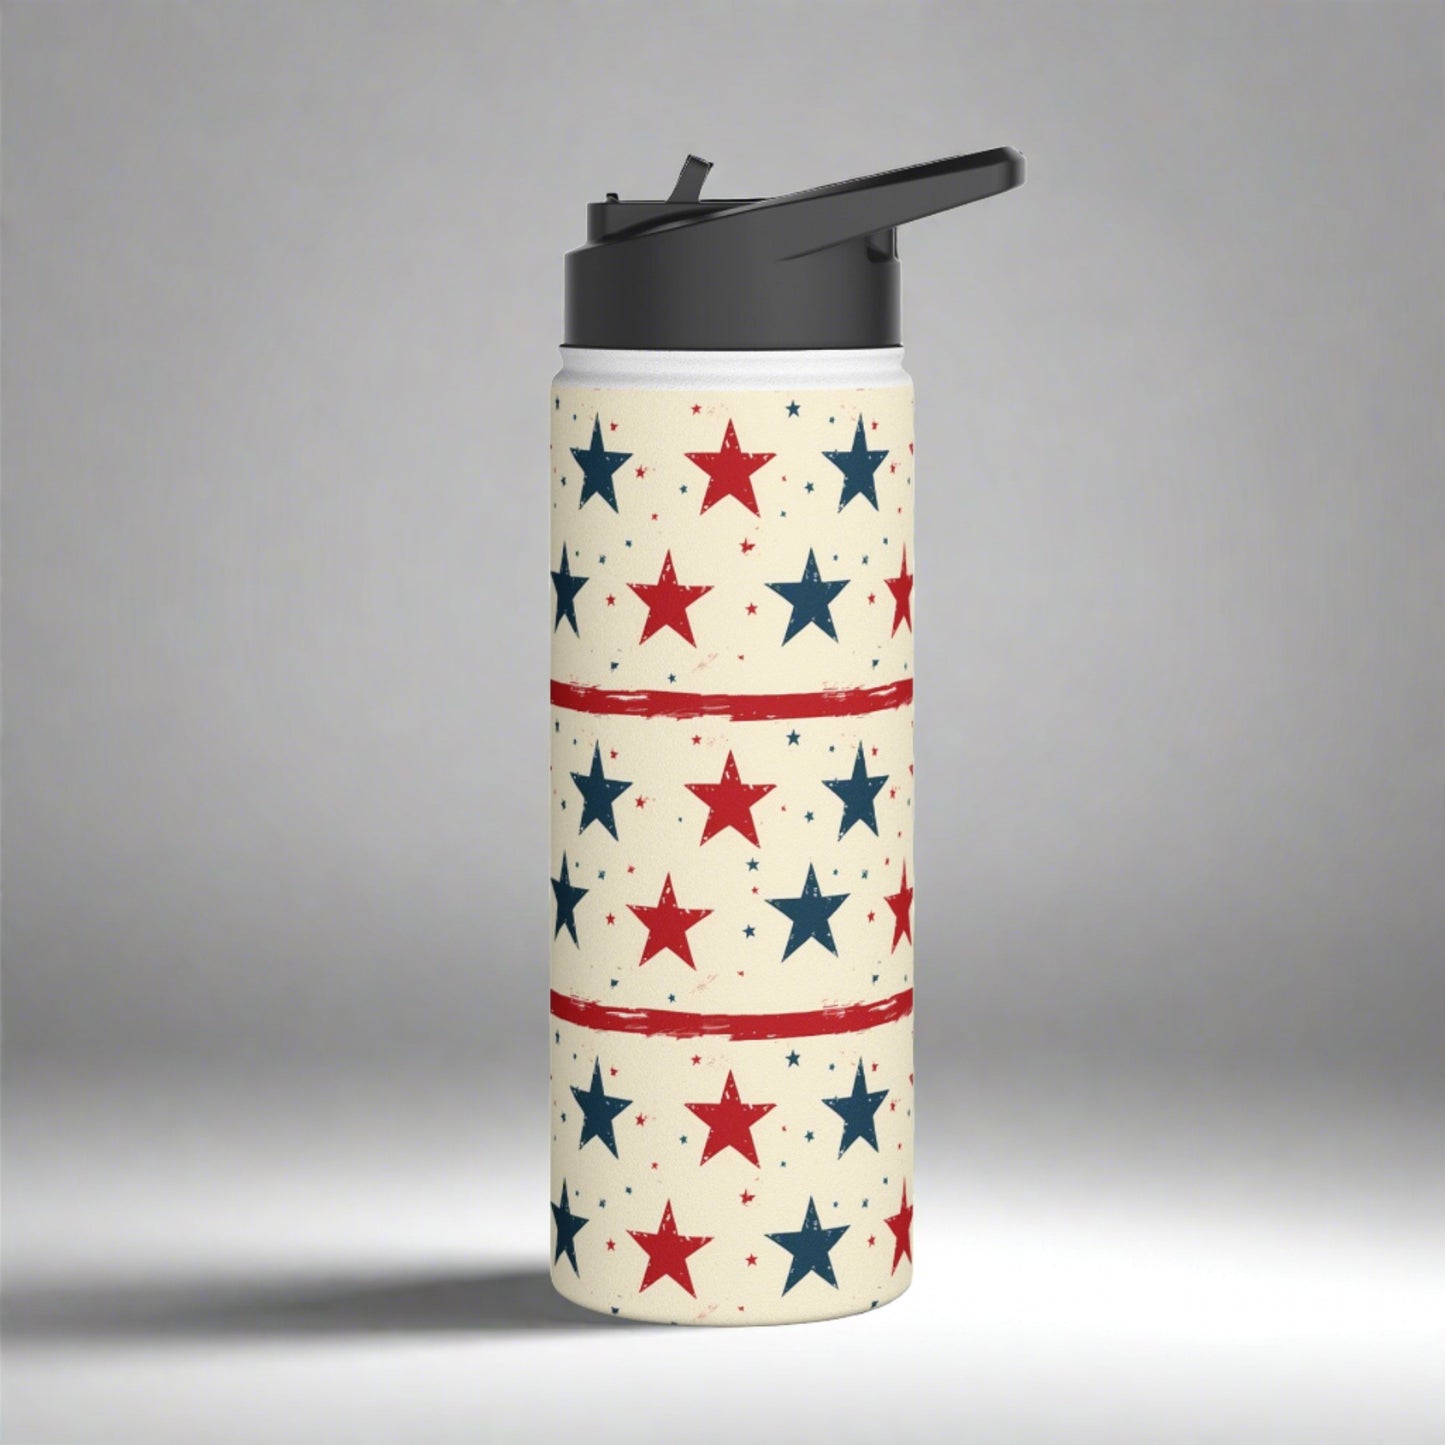 Stainless Steel Water Bottle Thermos, 18oz, Stars & Stripes - Double Wall Insulation Keeps Drinks Hot or Cold